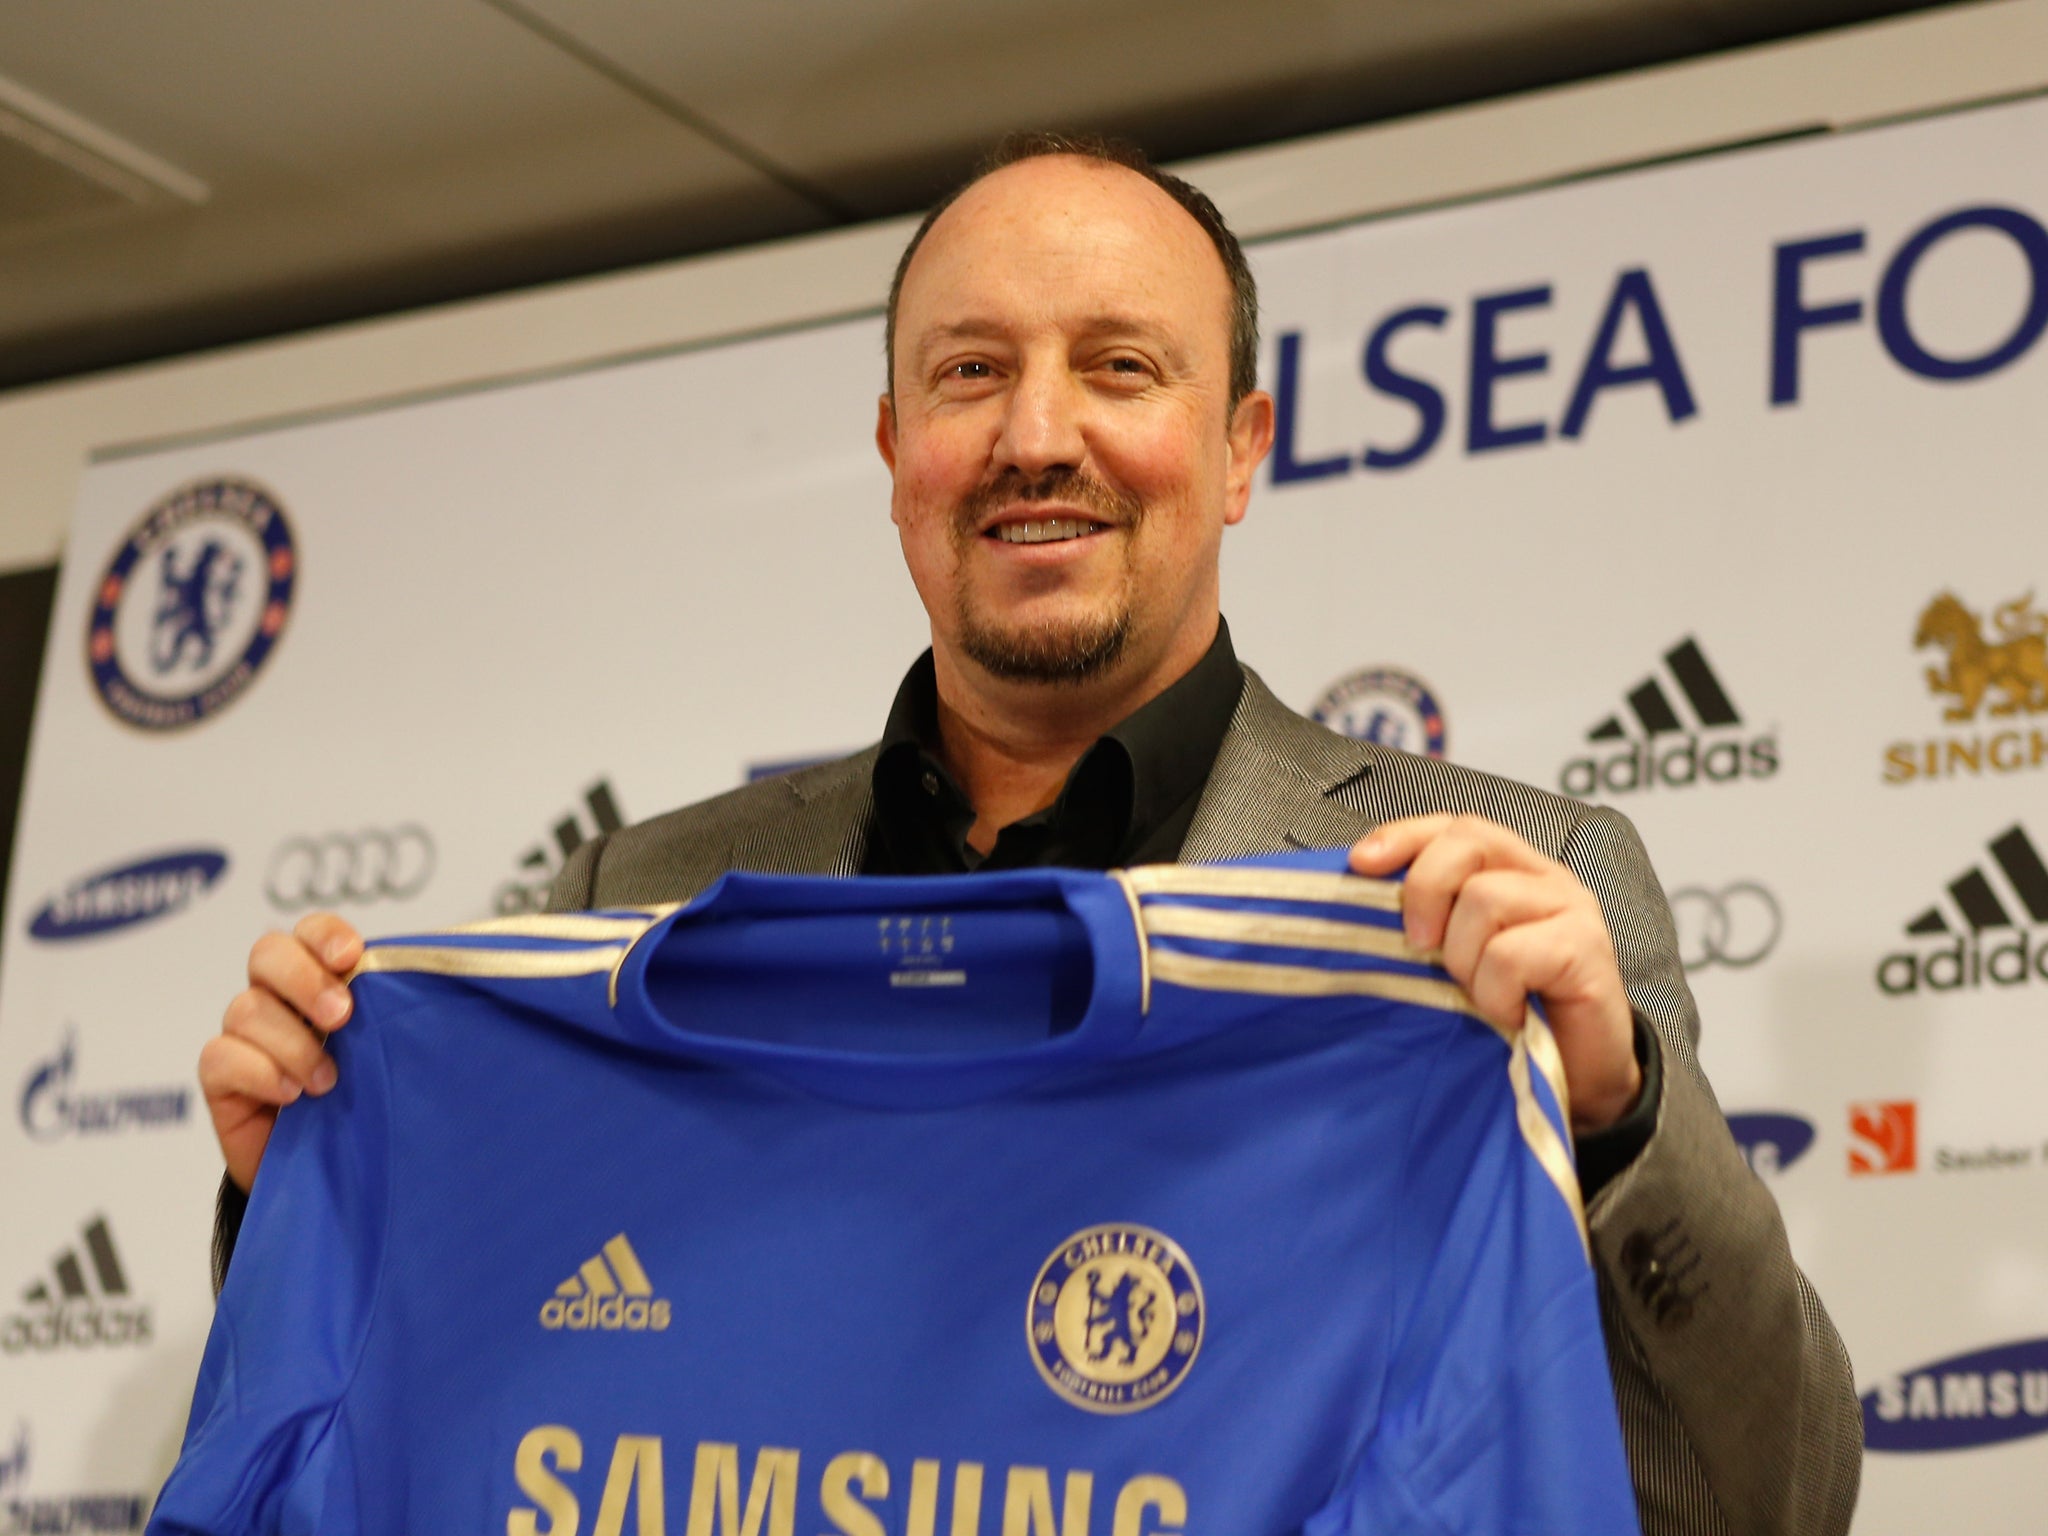 Chelsea's new manager Rafael Benitez was defiant that he could win the supporters over